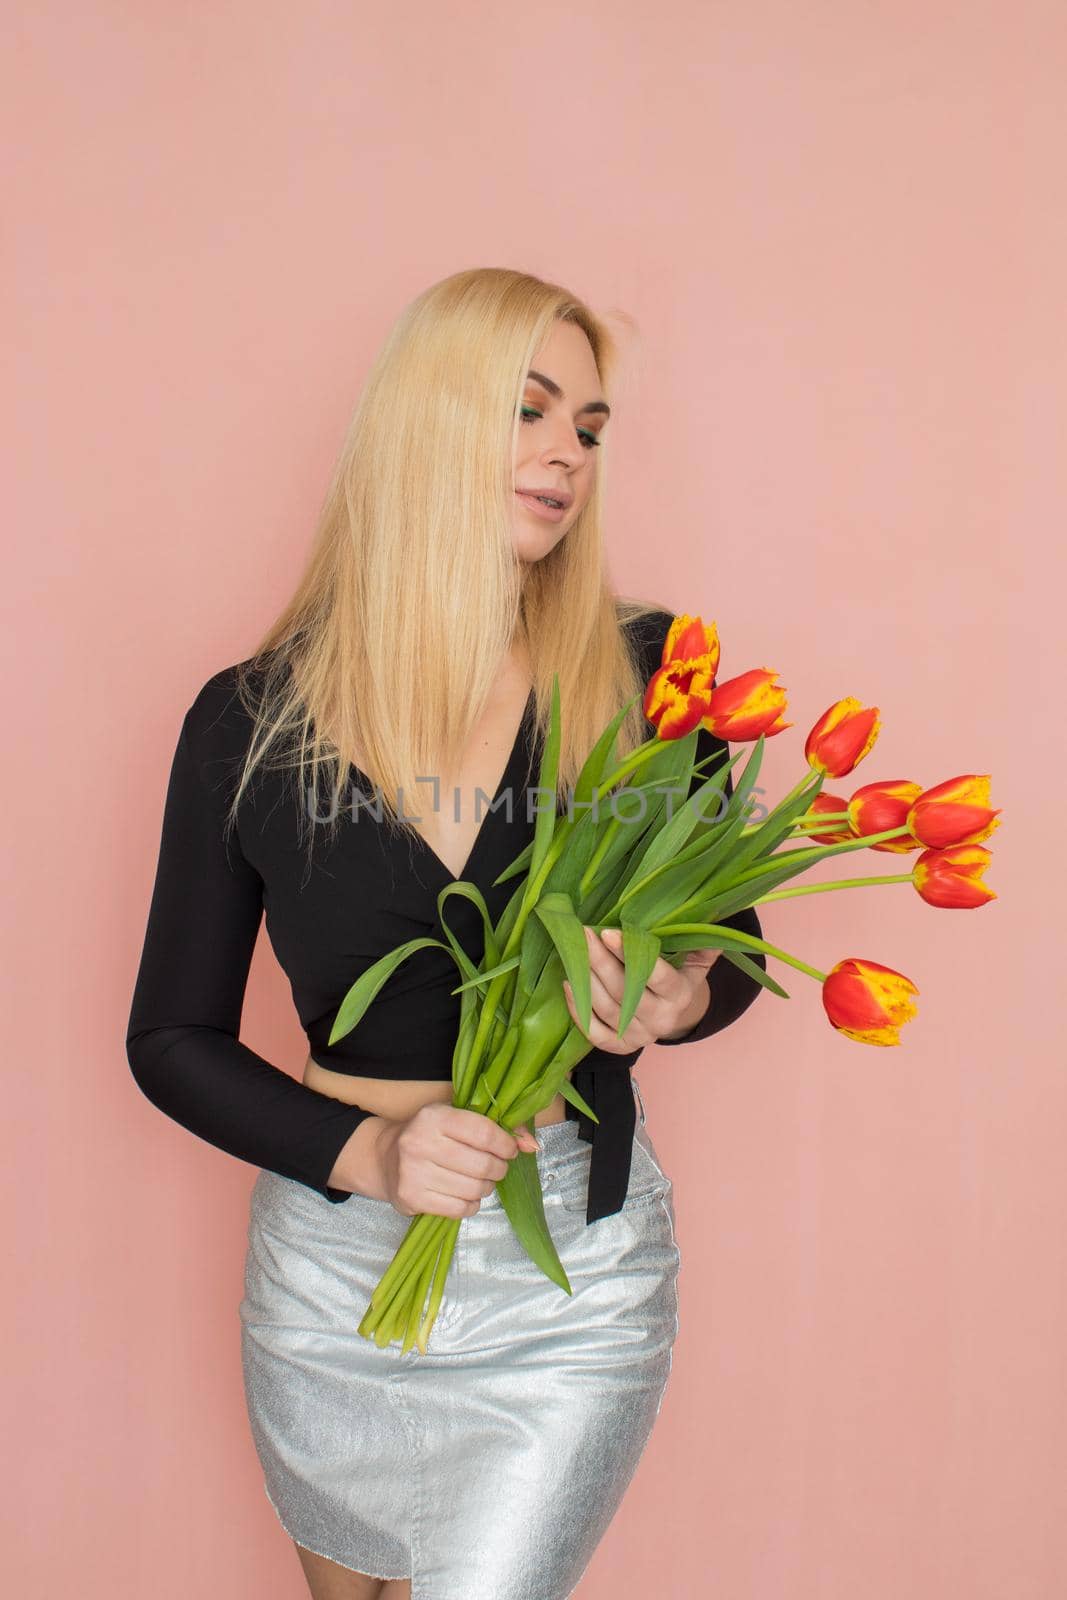 Fashion blonde woman holding red tulips in her hands by Bonda